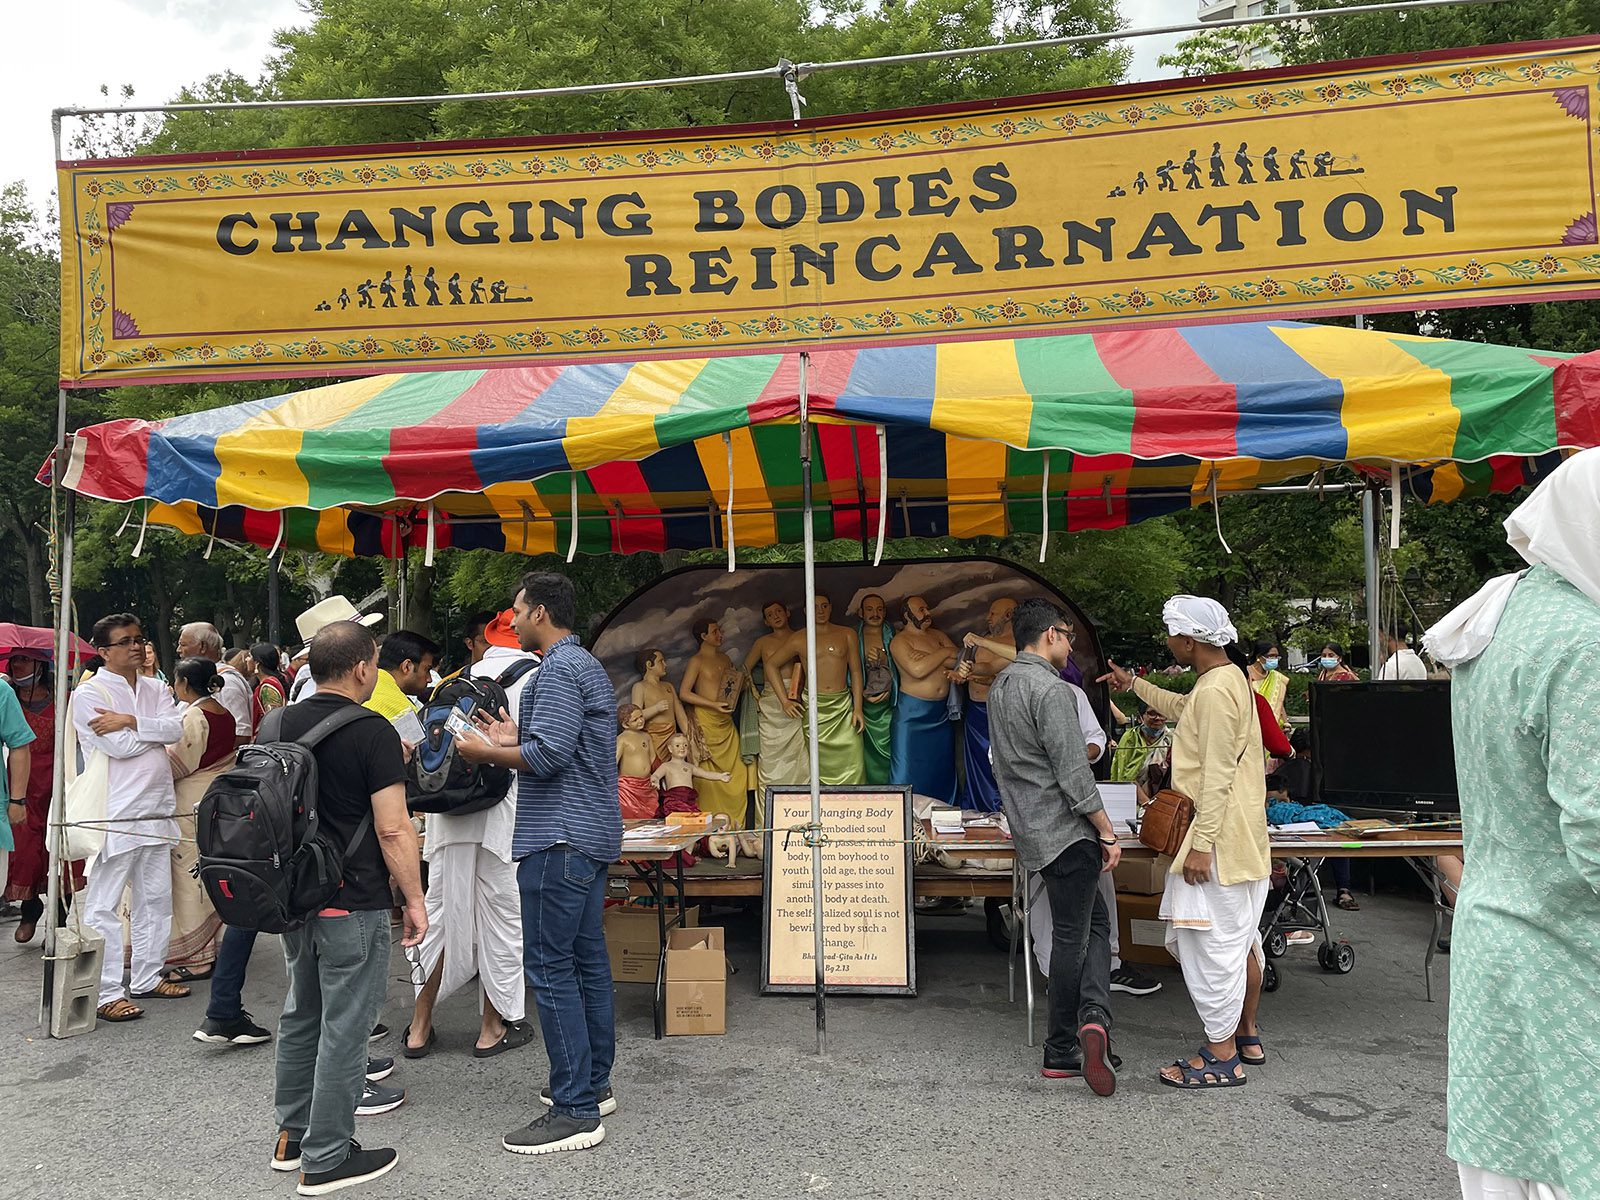 People surround a booth about reincarnation during the Hare Krishna Festival at Washington Square Park on June 11, 2022, in Manhattan, New York. RNS photo by Richa Karmarkar